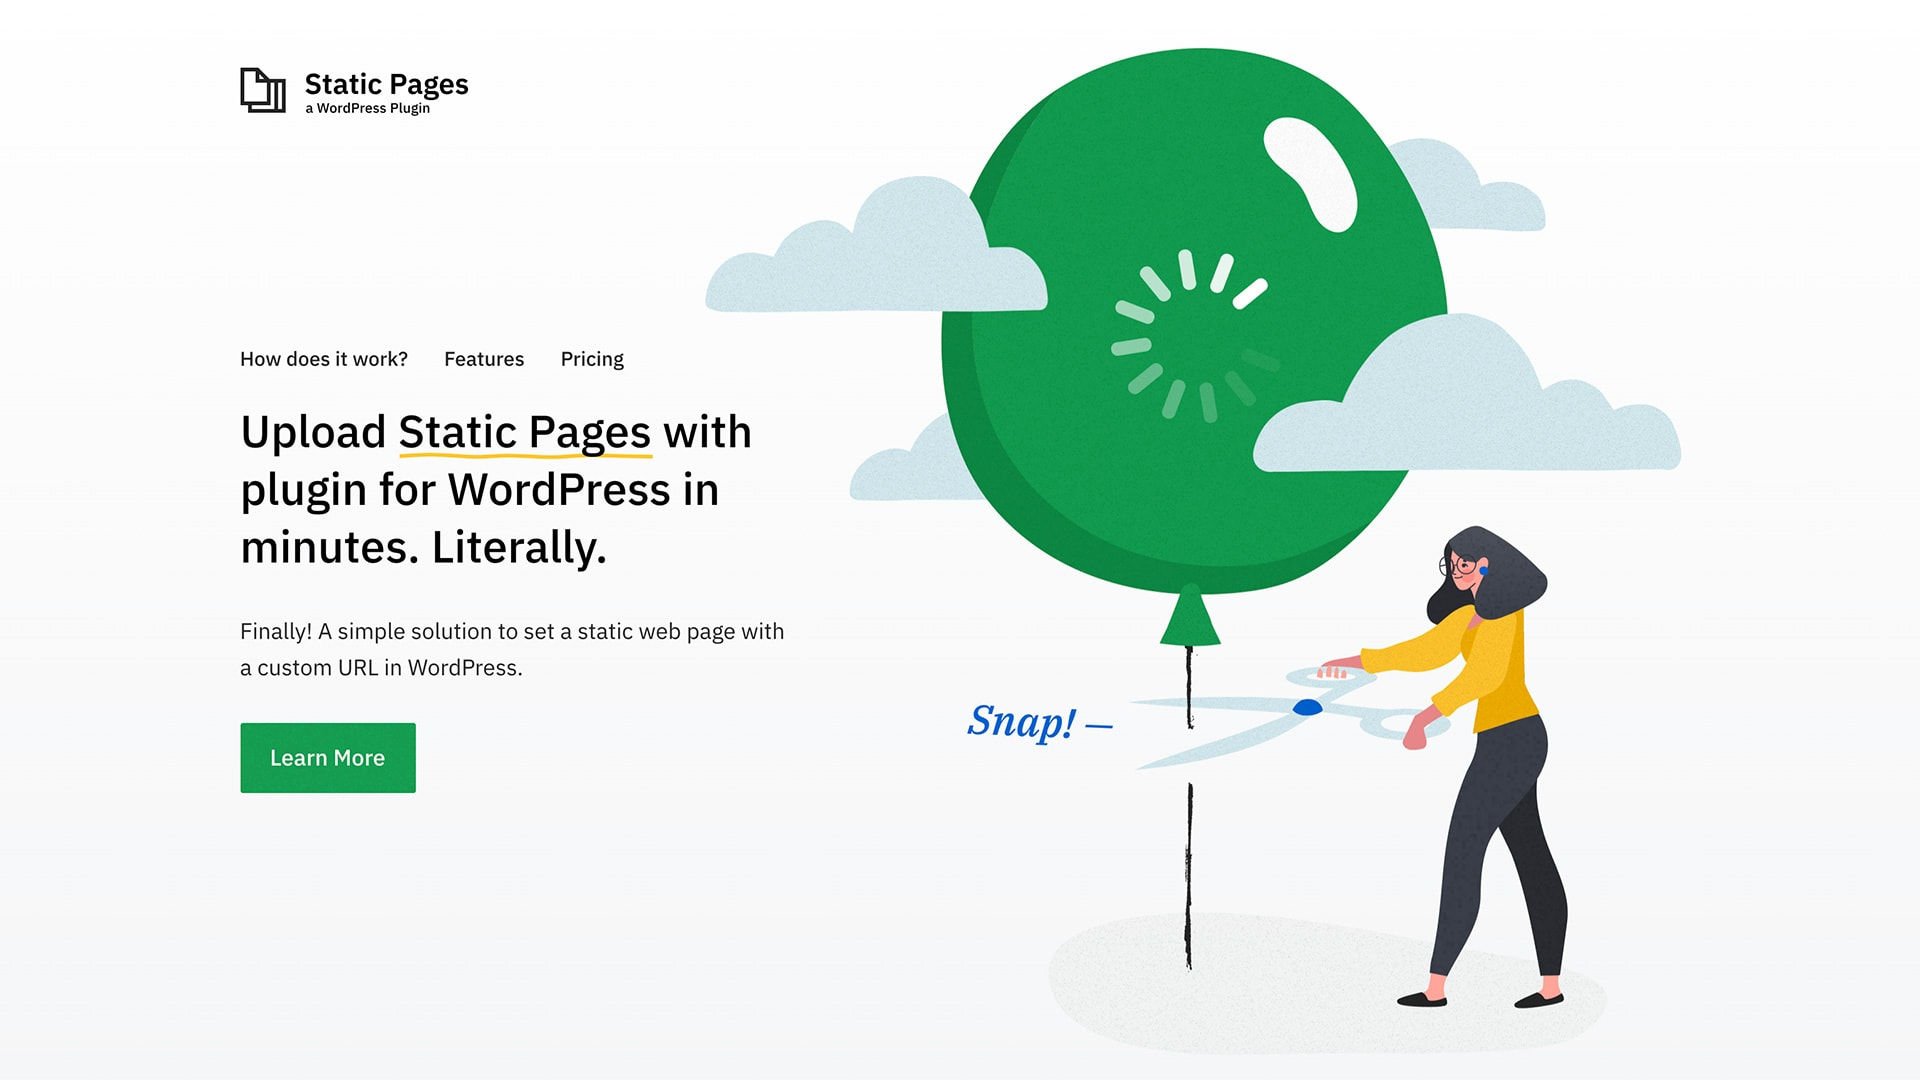 Static HTML - Upload Static Pages With Plugin For WordPress in Minutes.jpg